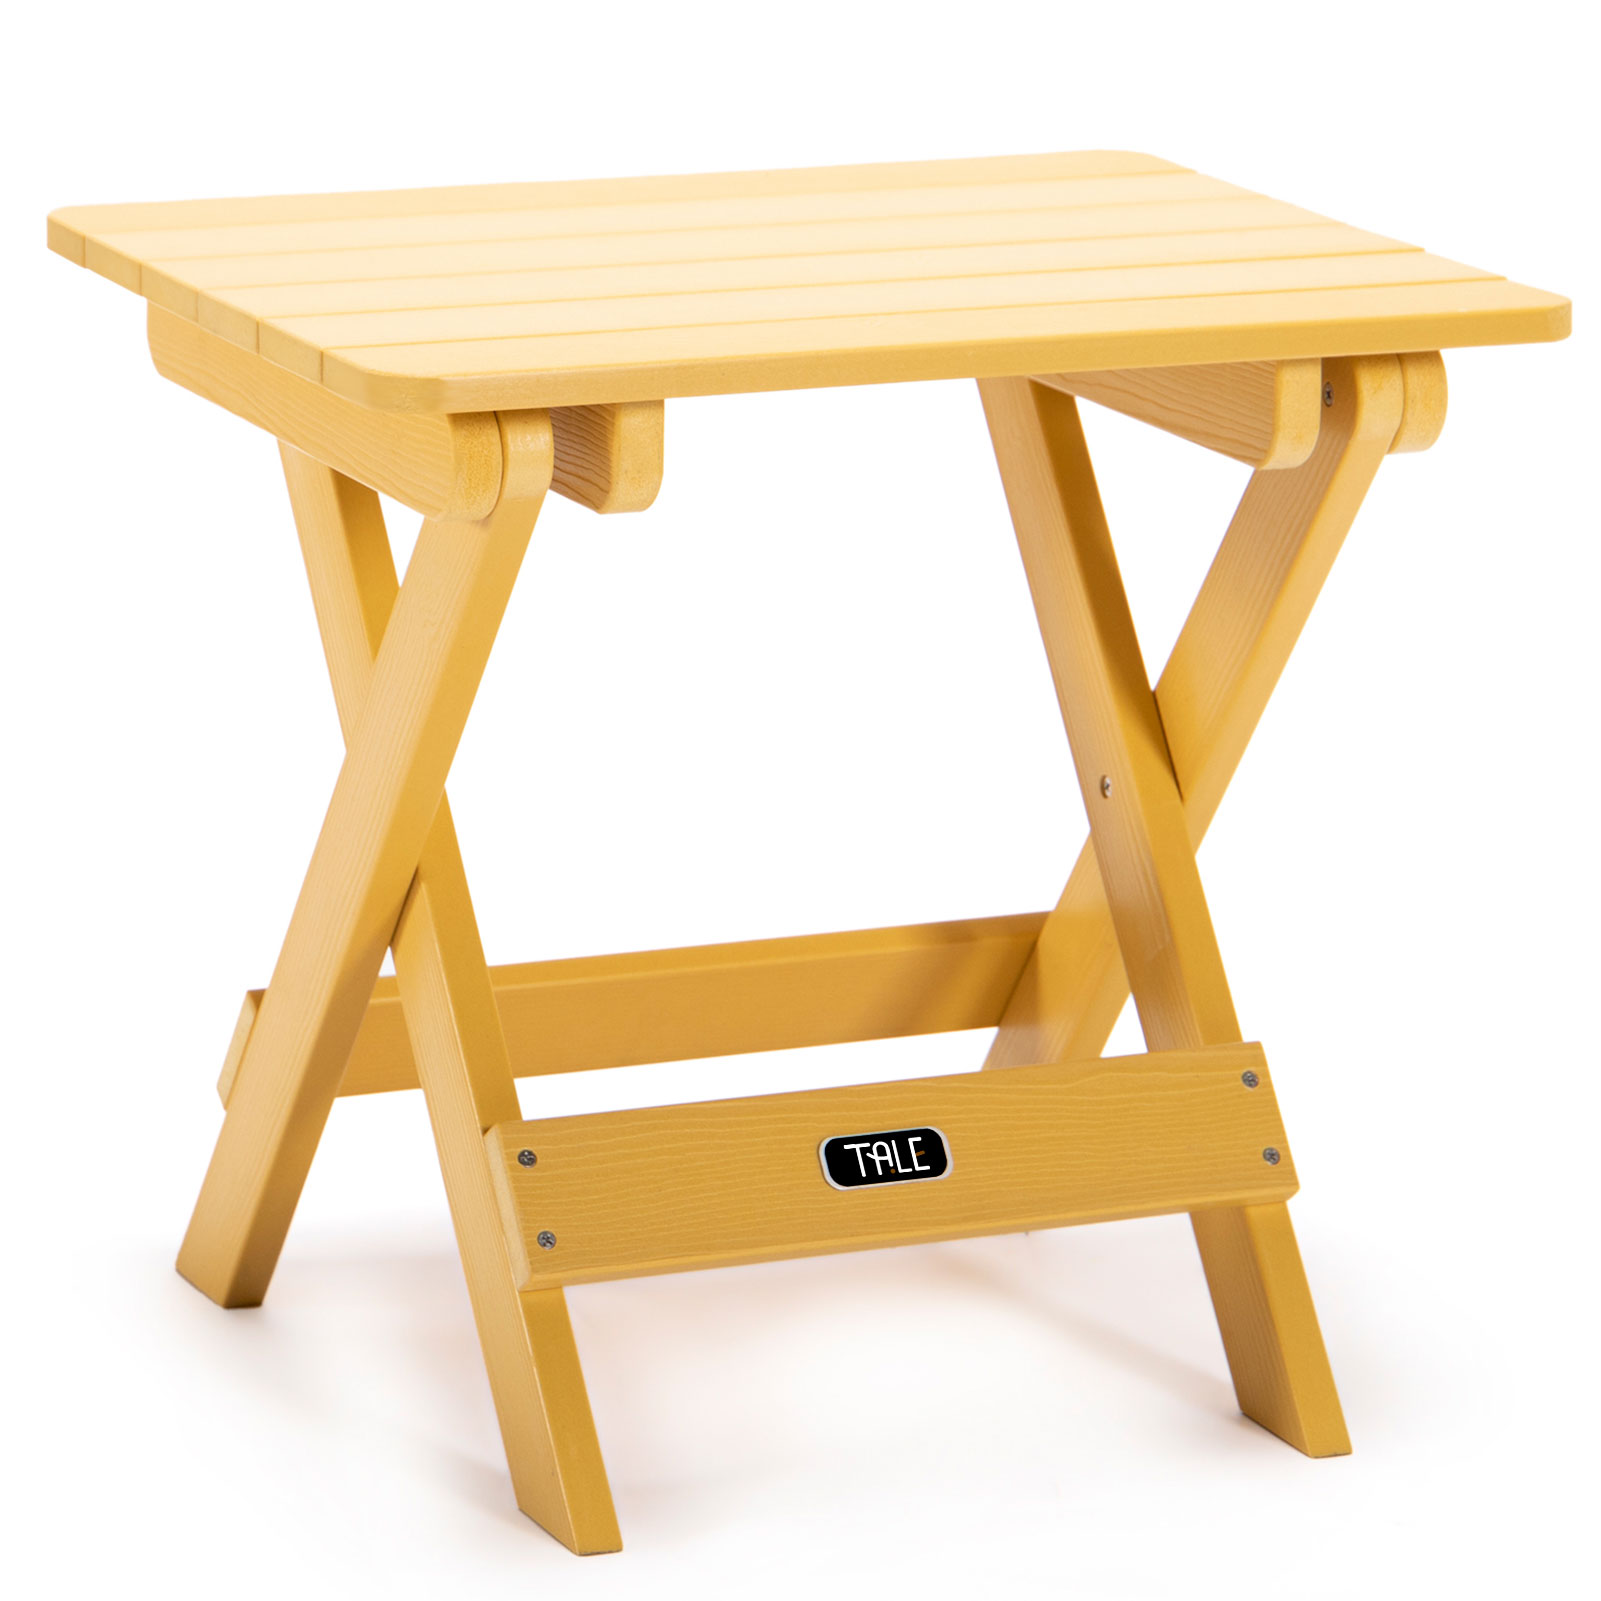 TALE Adirondack Portable Folding Side Table Square All-Weather and Fade-Resistant Plastic Wood Table Perfect for Outdoor Garden, Beach, Camping, Picnics Yellow-Boyel Living